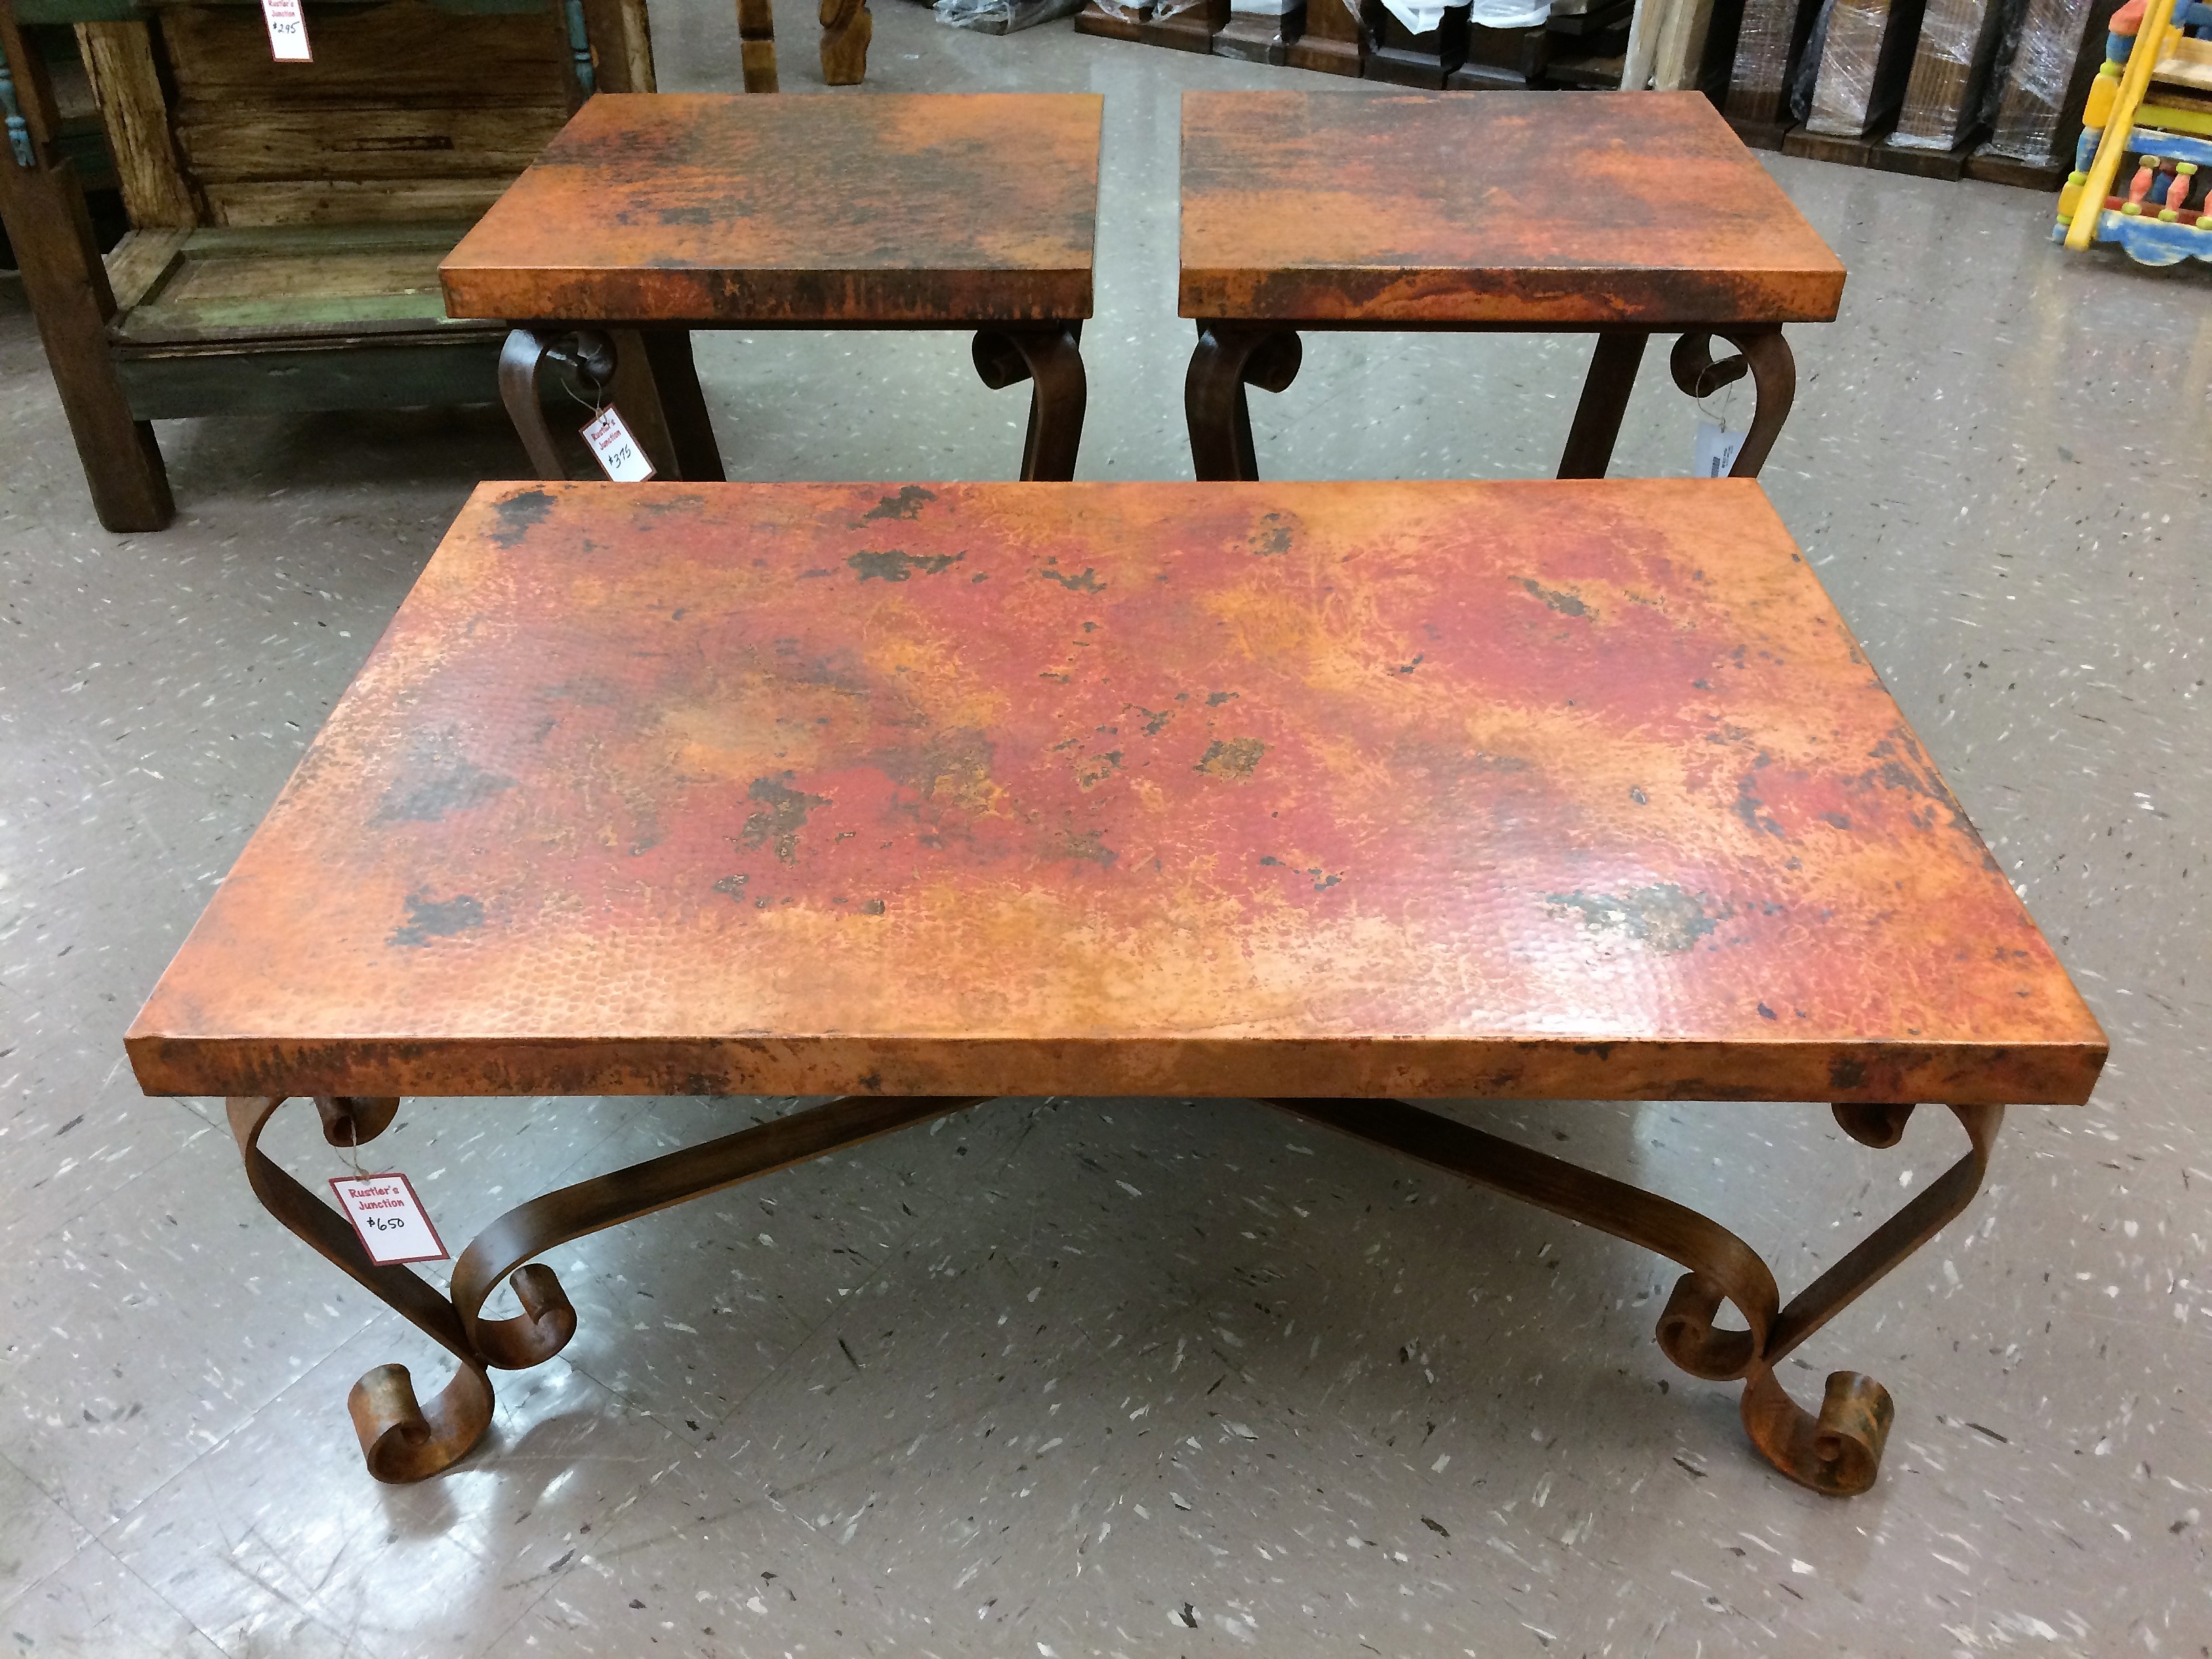 Our copper tables come in rectangular, square, or round and are available in coffee tables, sofa tables, and end tables. Mix and Match for a distinctive look to your home!